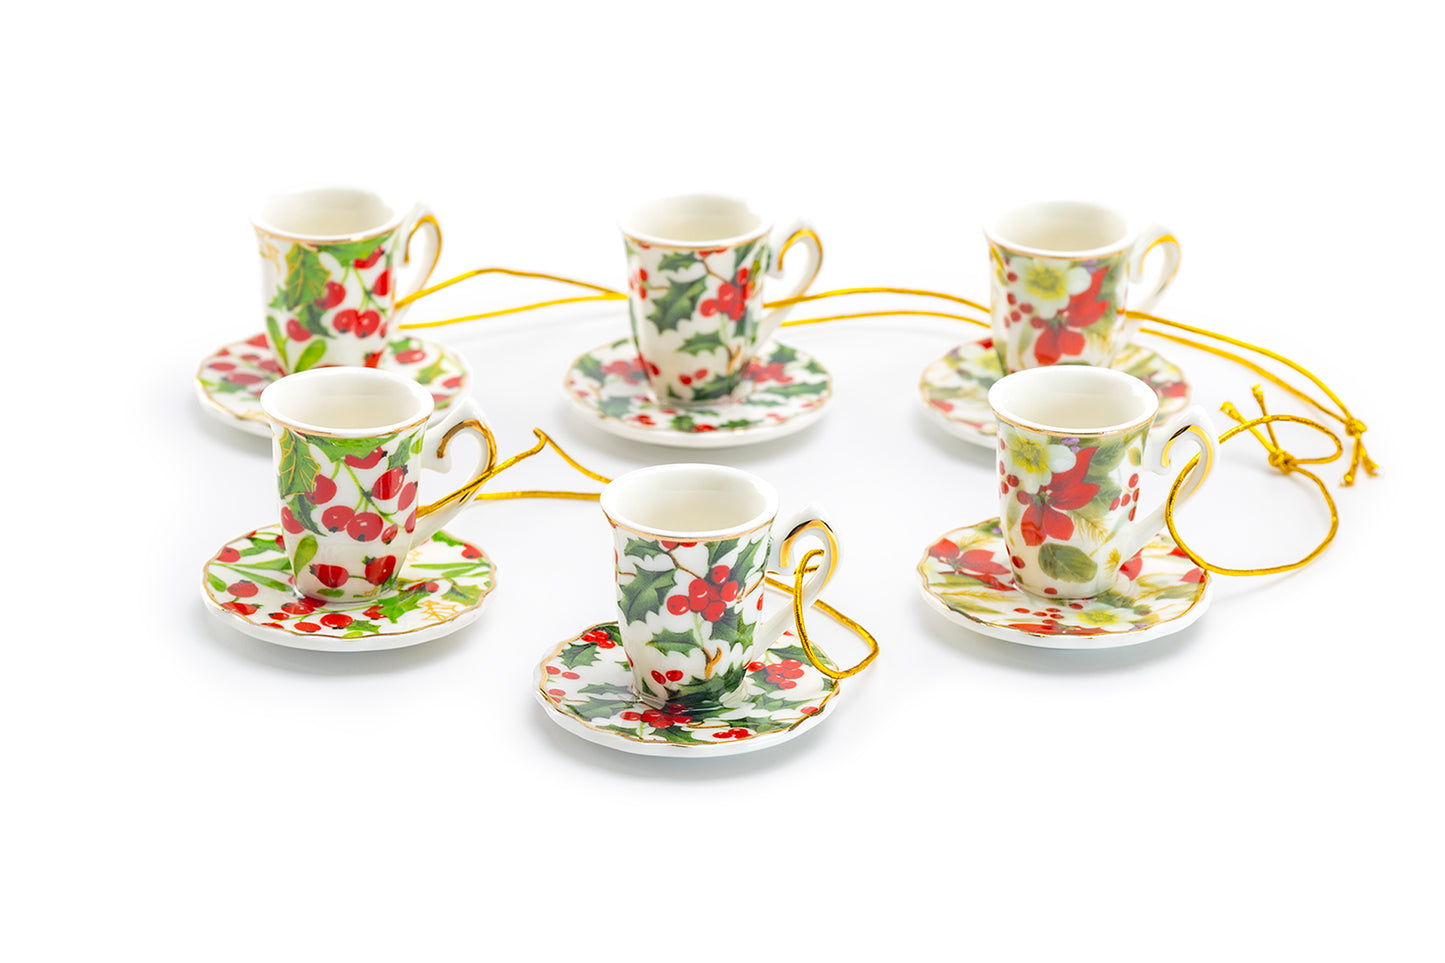 Grace Teaware Holly Berries and Poinsettia Assorted Mini Teacups Ornament Set of 6 Christmas Tree Ornament